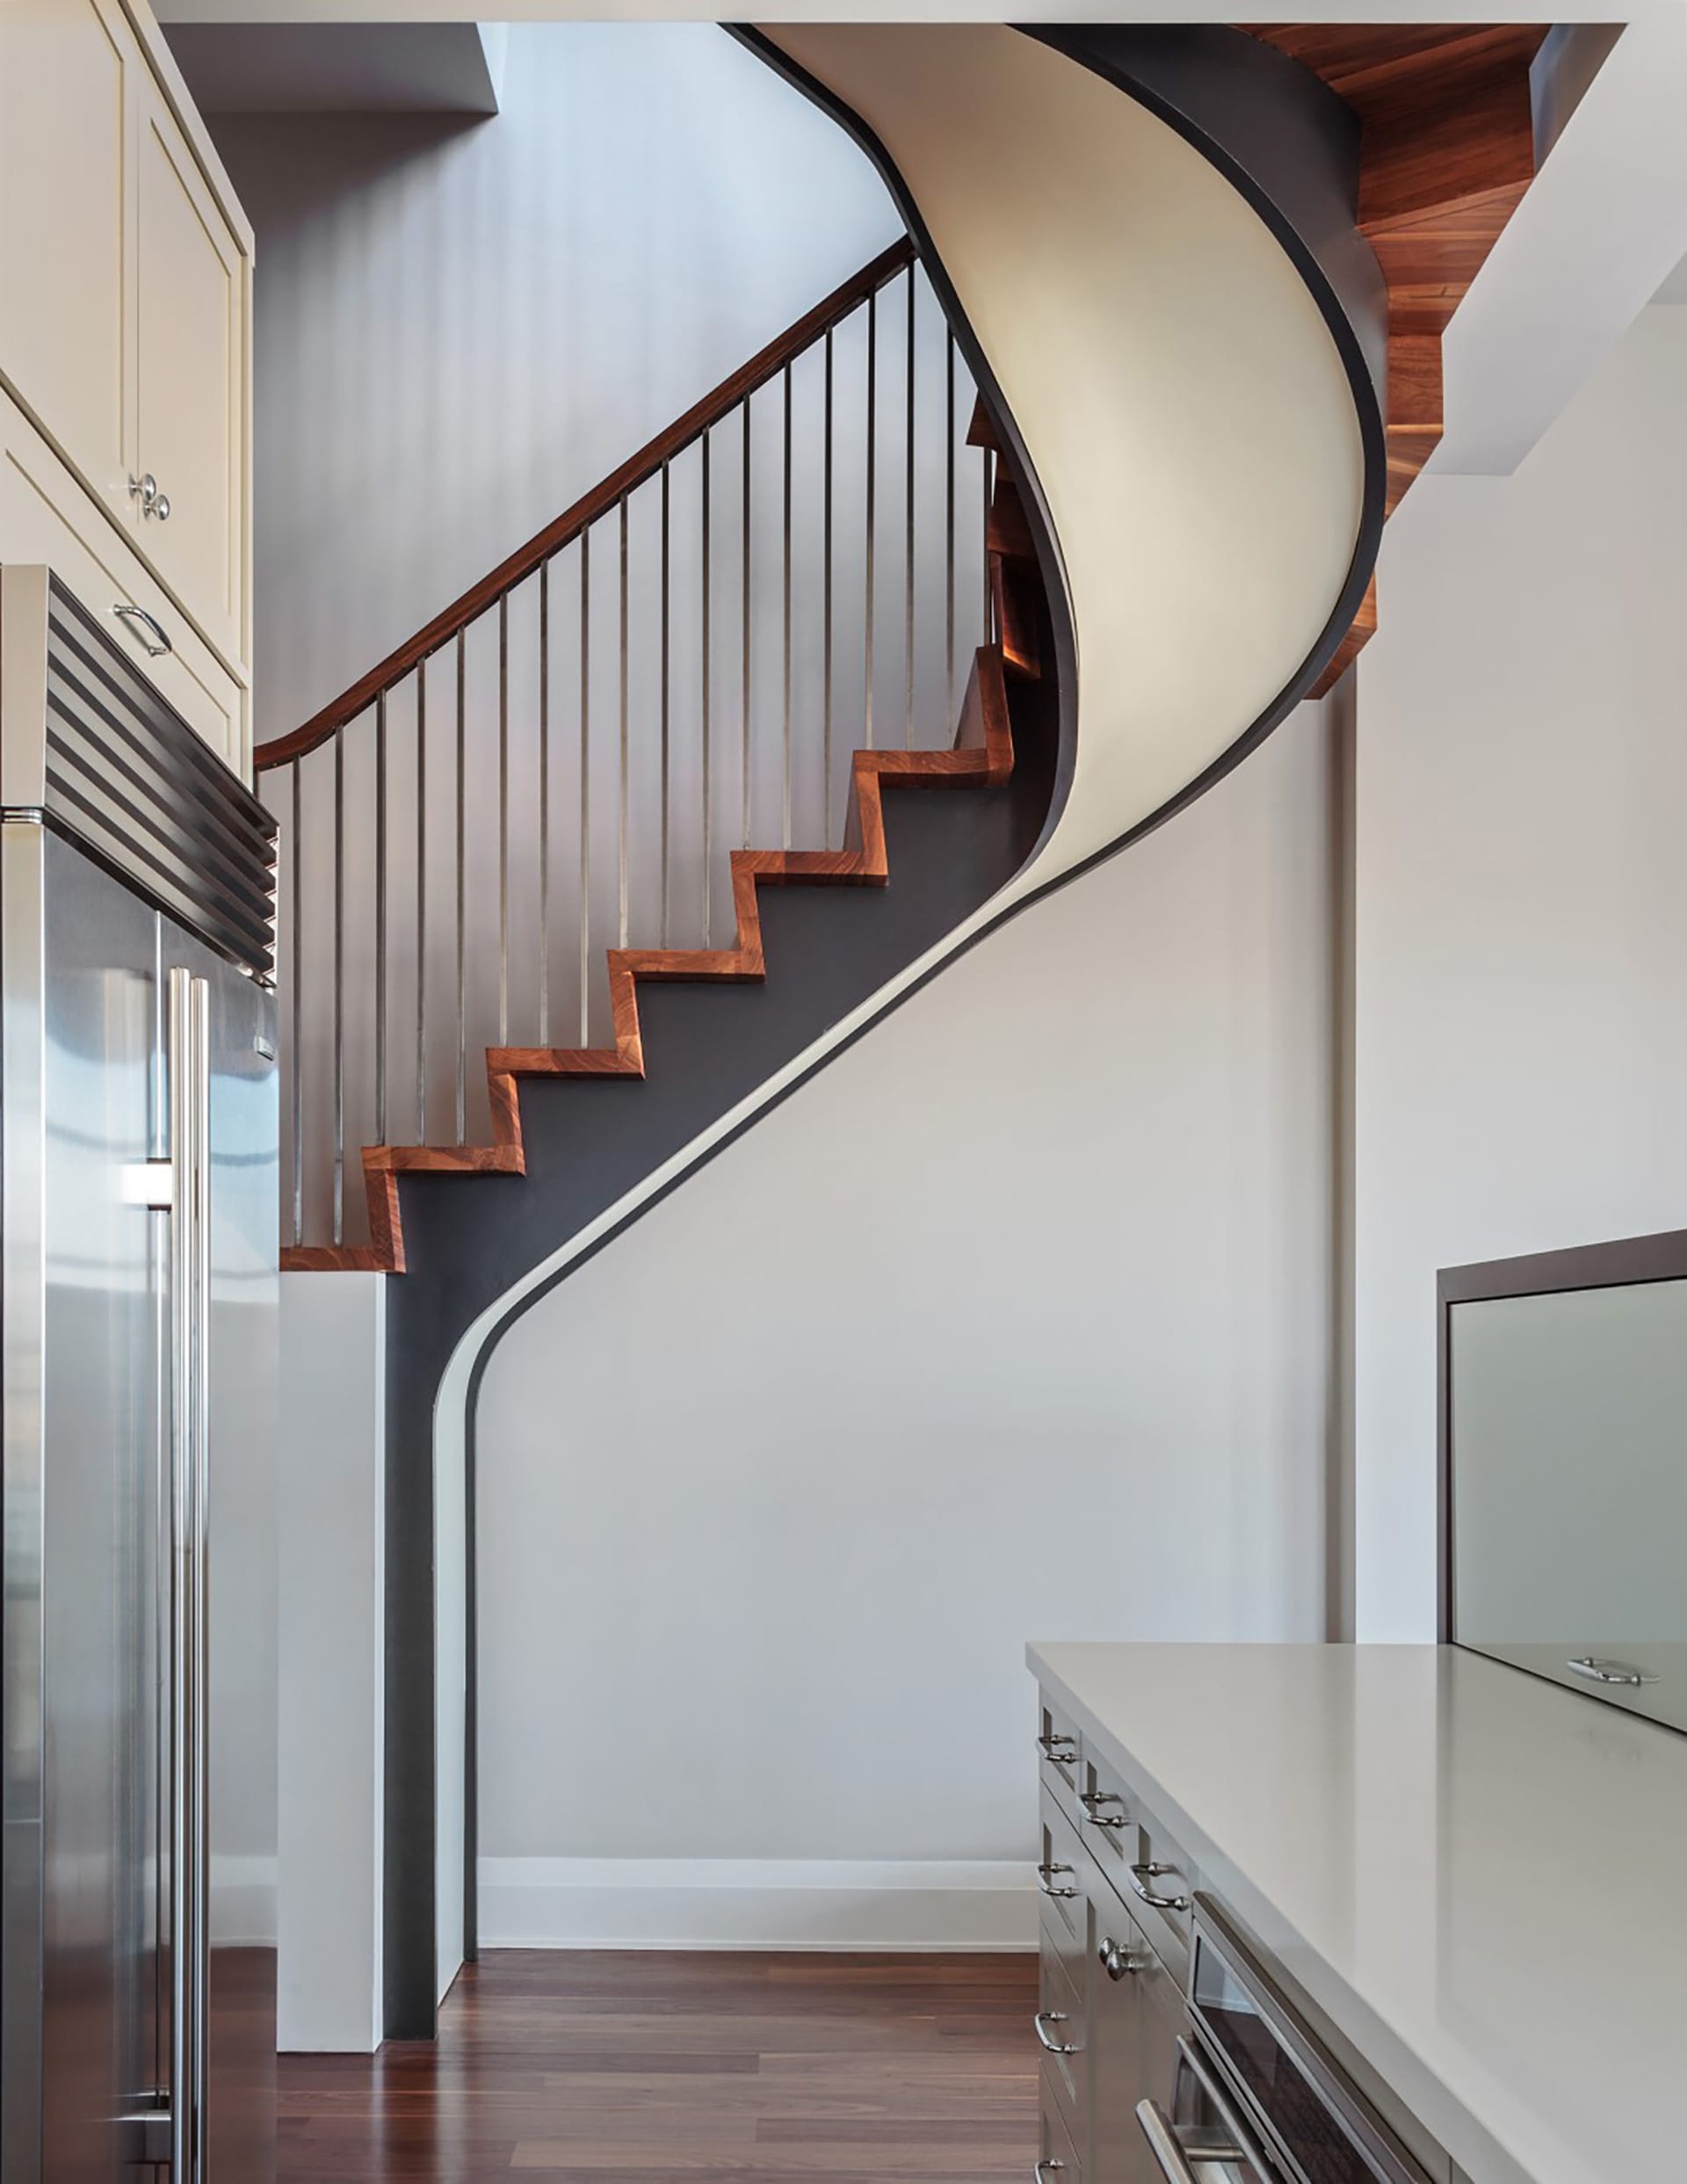 Sculptural staircase with black handrail and balusters, wood risers, and a white underside, next to the kitchen